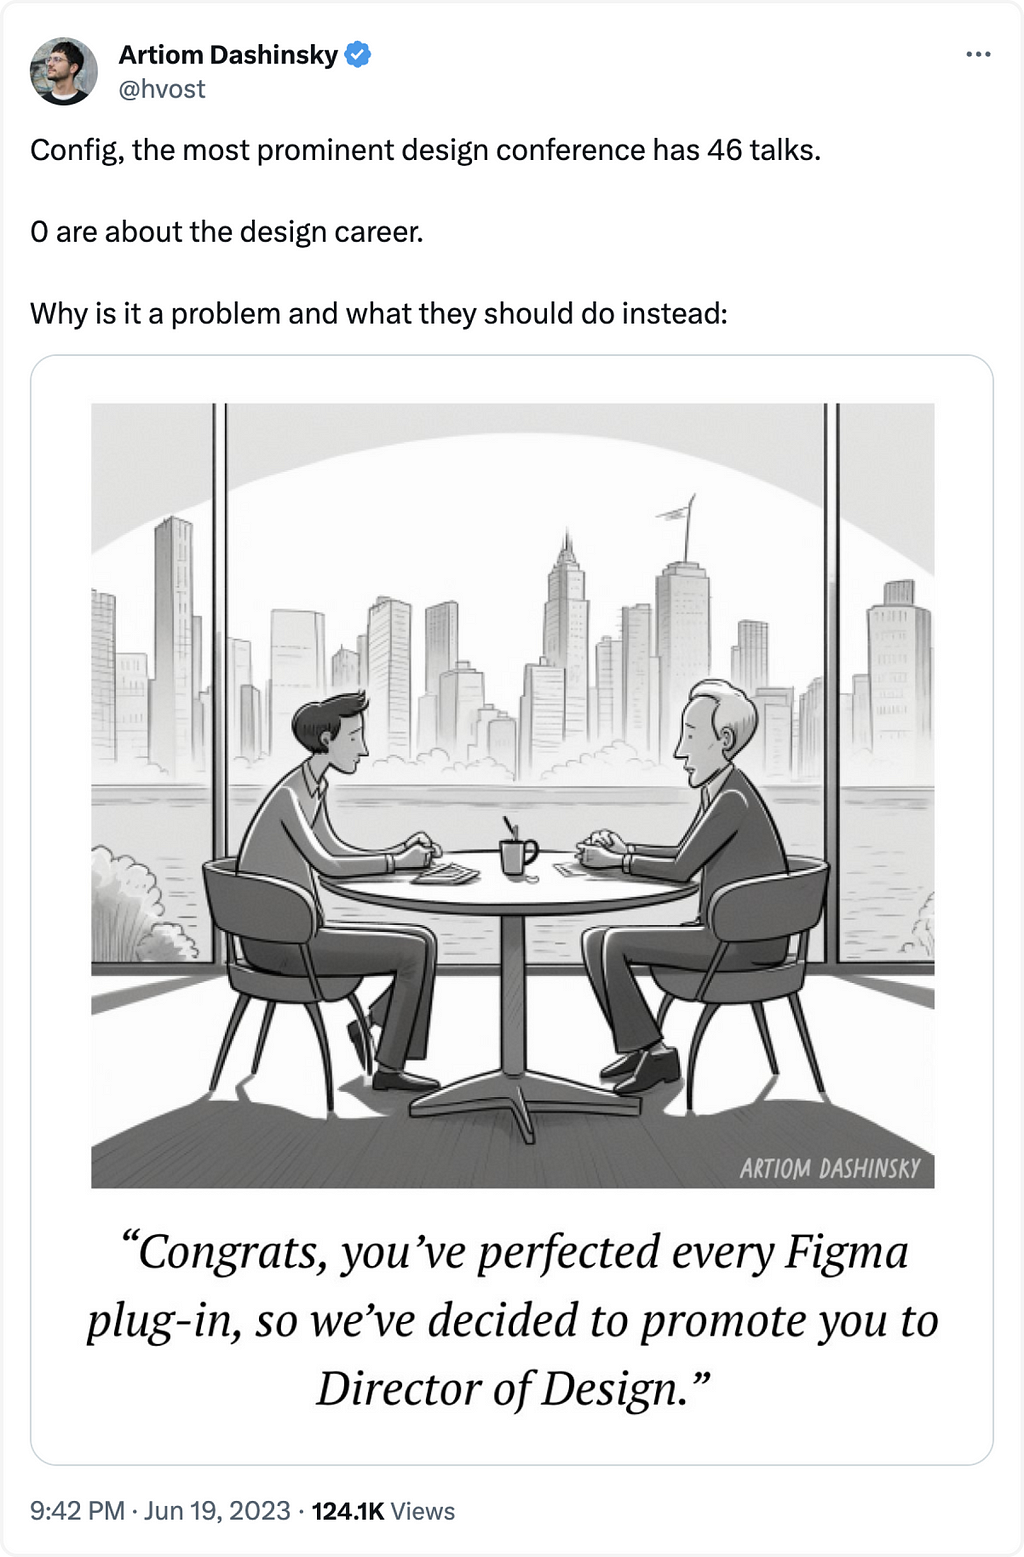 A tweet with an image of two men sitting across from each other at a table. The subtitle reads “Congrats, you’ve perfected every figma plug-in, you’re promoted to Director of design” in a sarcastic tone.